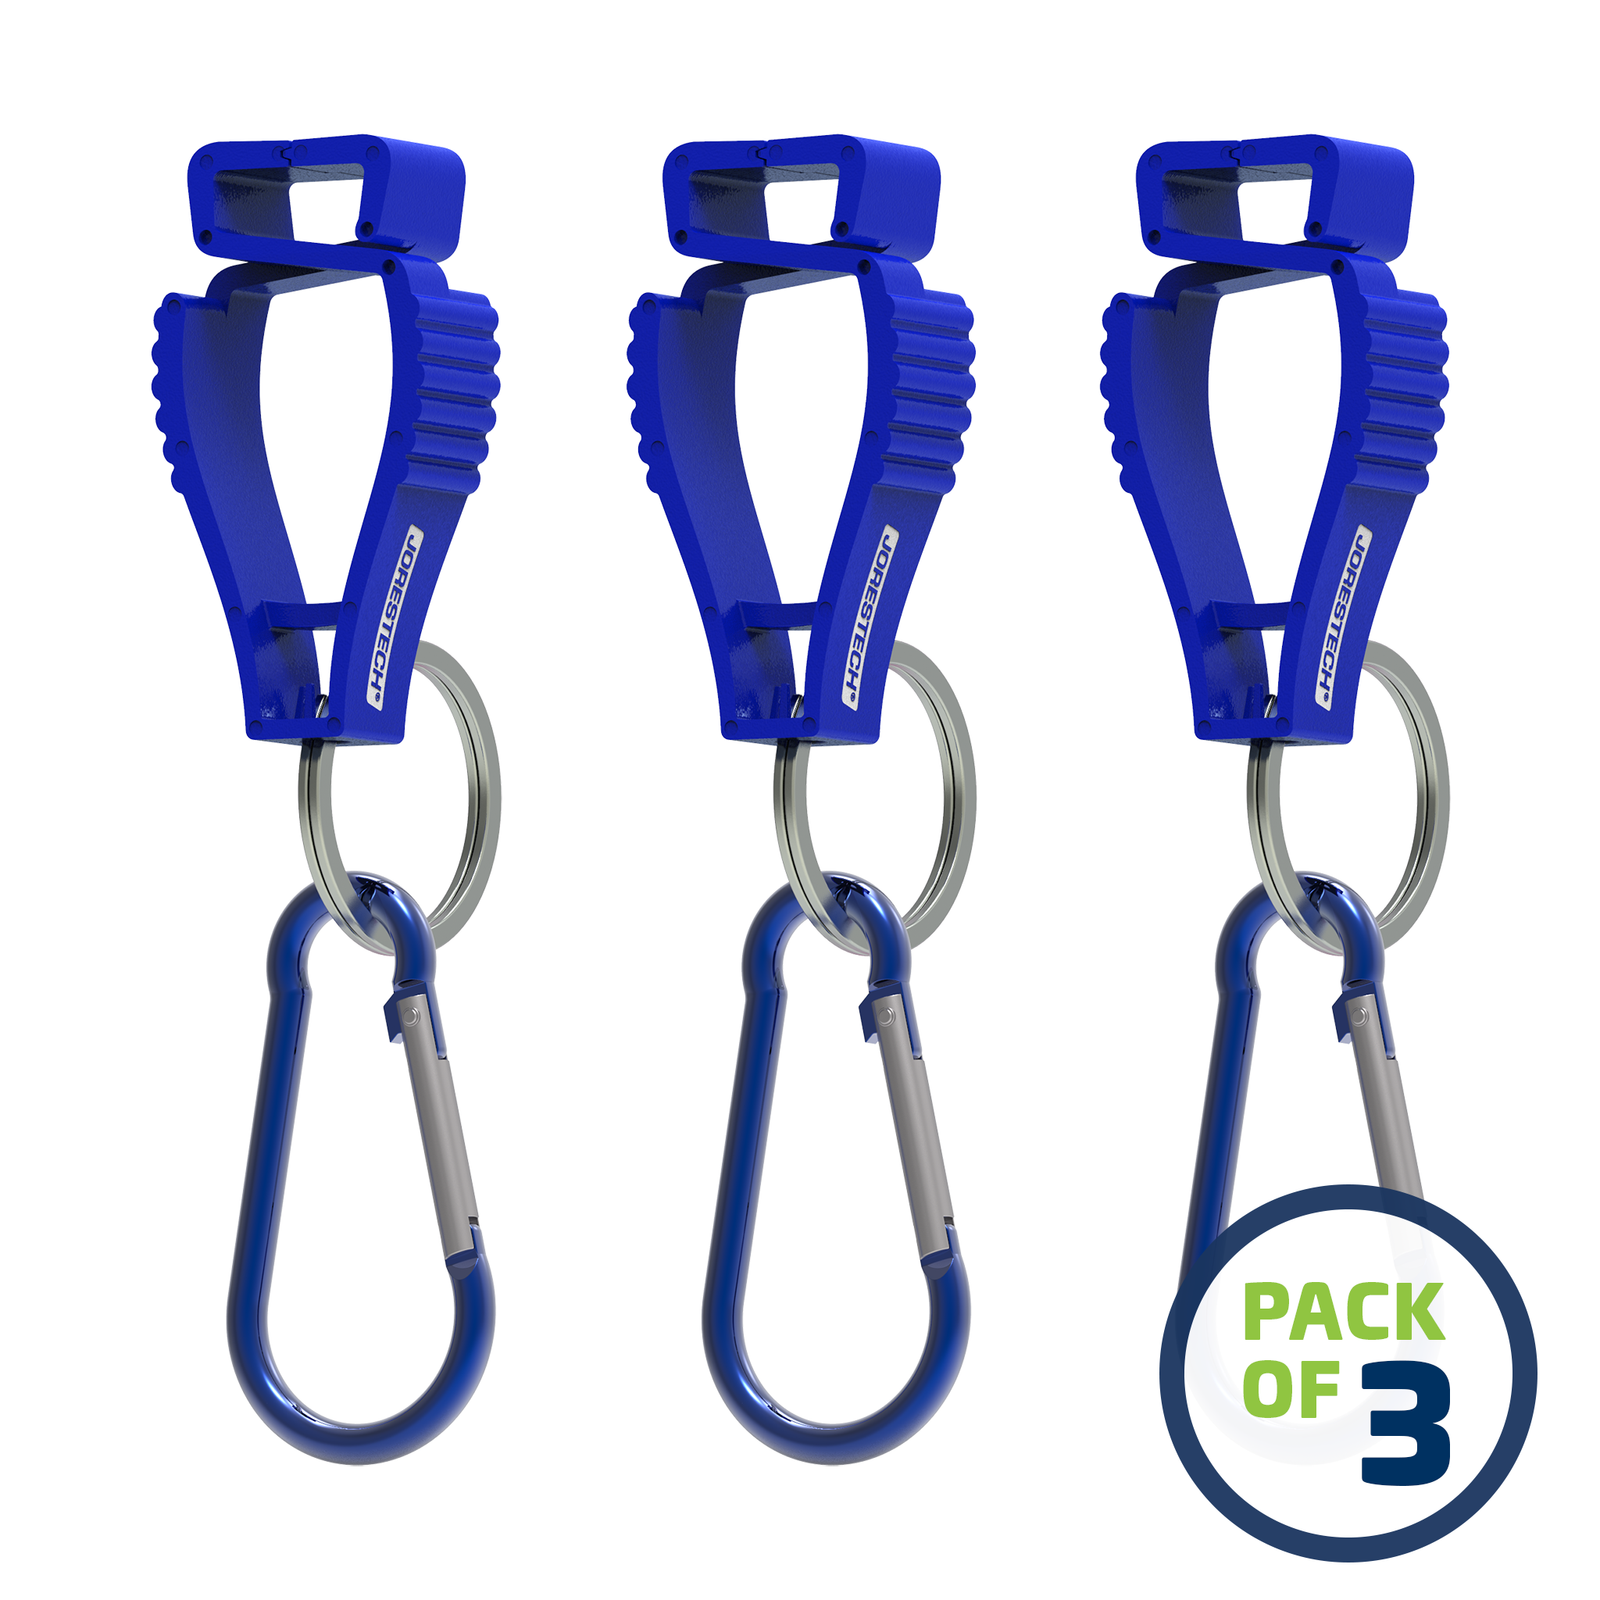 Pack of 3 Blue JORESTECH glove clip safety holders with carabiner 